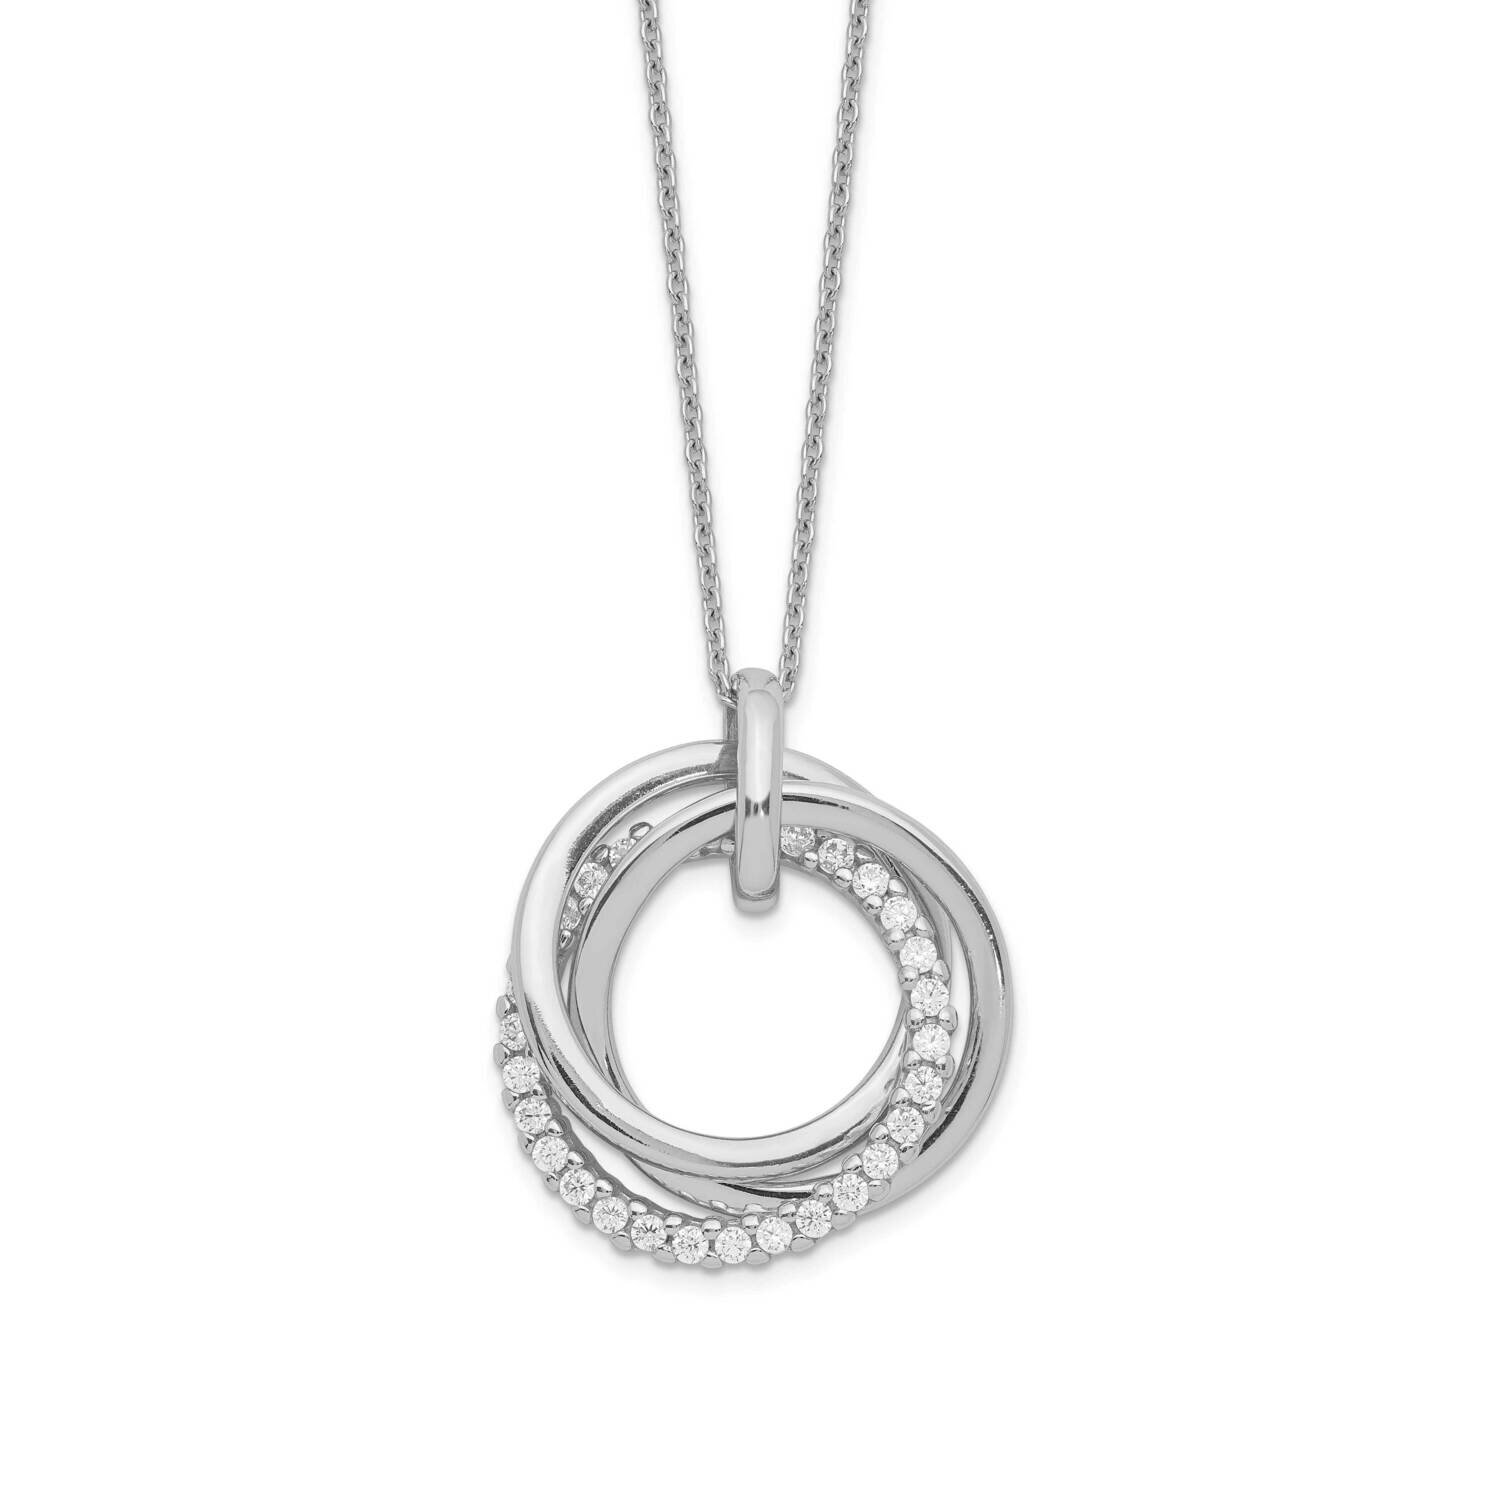 Fancy Cz Necklace with 2 Inch Extension Sterling Silver Rhodium-plated QG5193-15.5